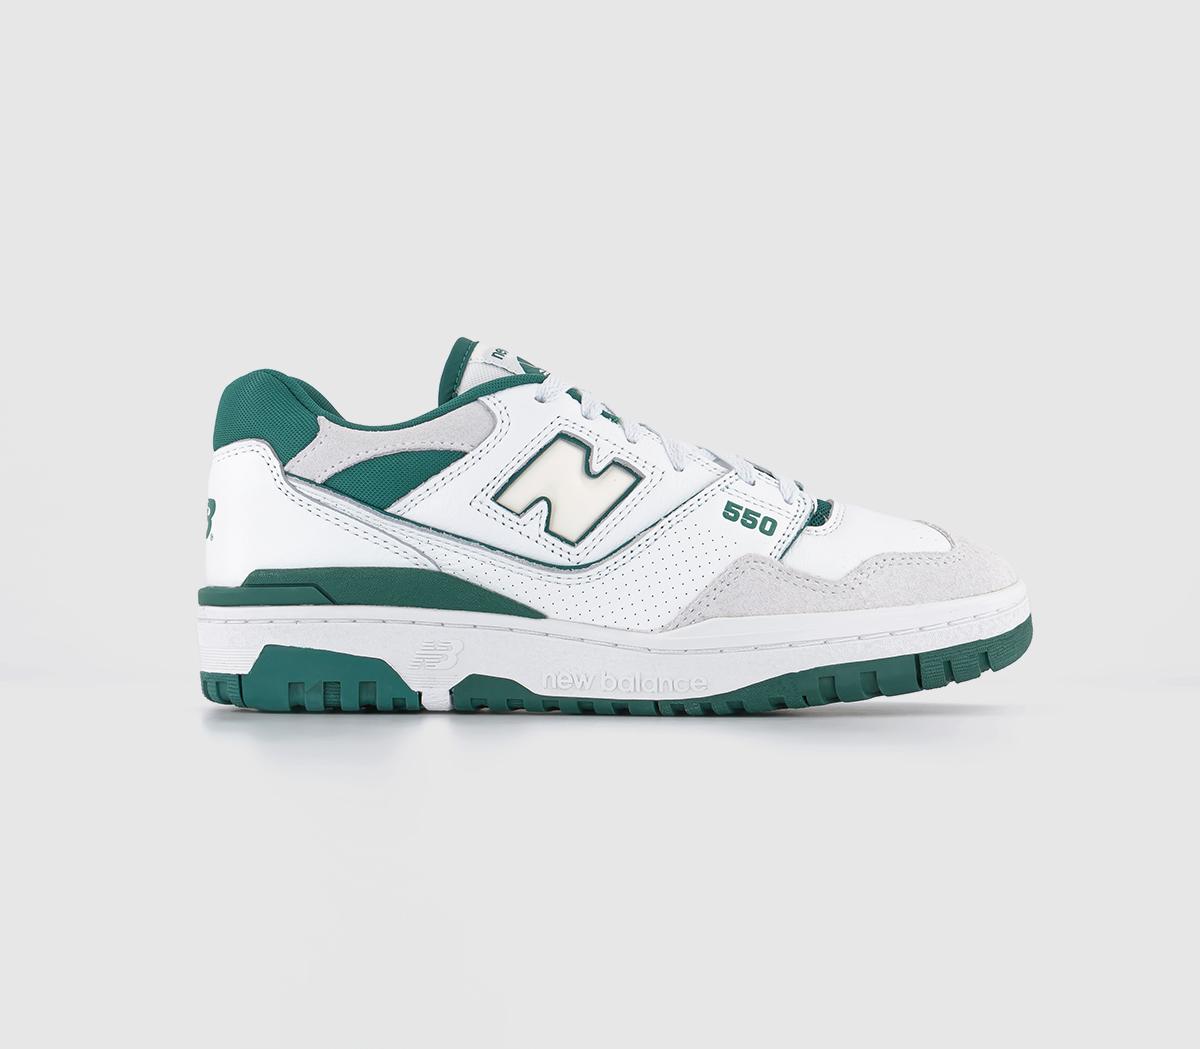 New Balance BB550 Trainers White Teal Offwhite - Men's Trainers